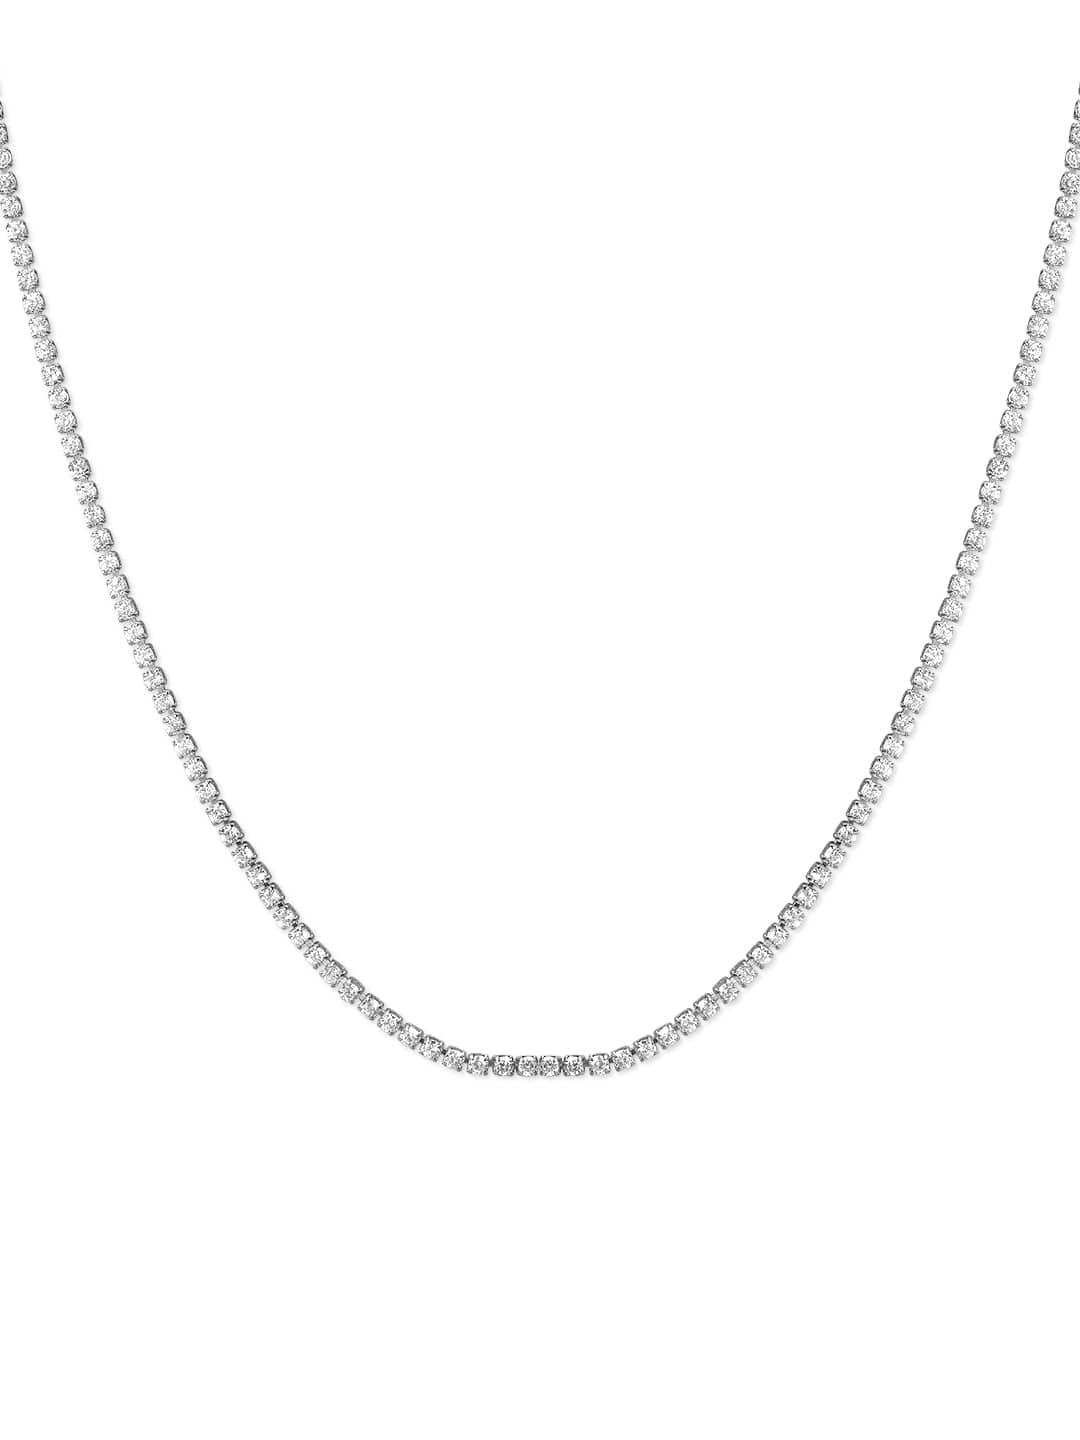 Rubans Voguish Silver Plated Zirconia Stone Studded Western Chain. Chain & Necklaces